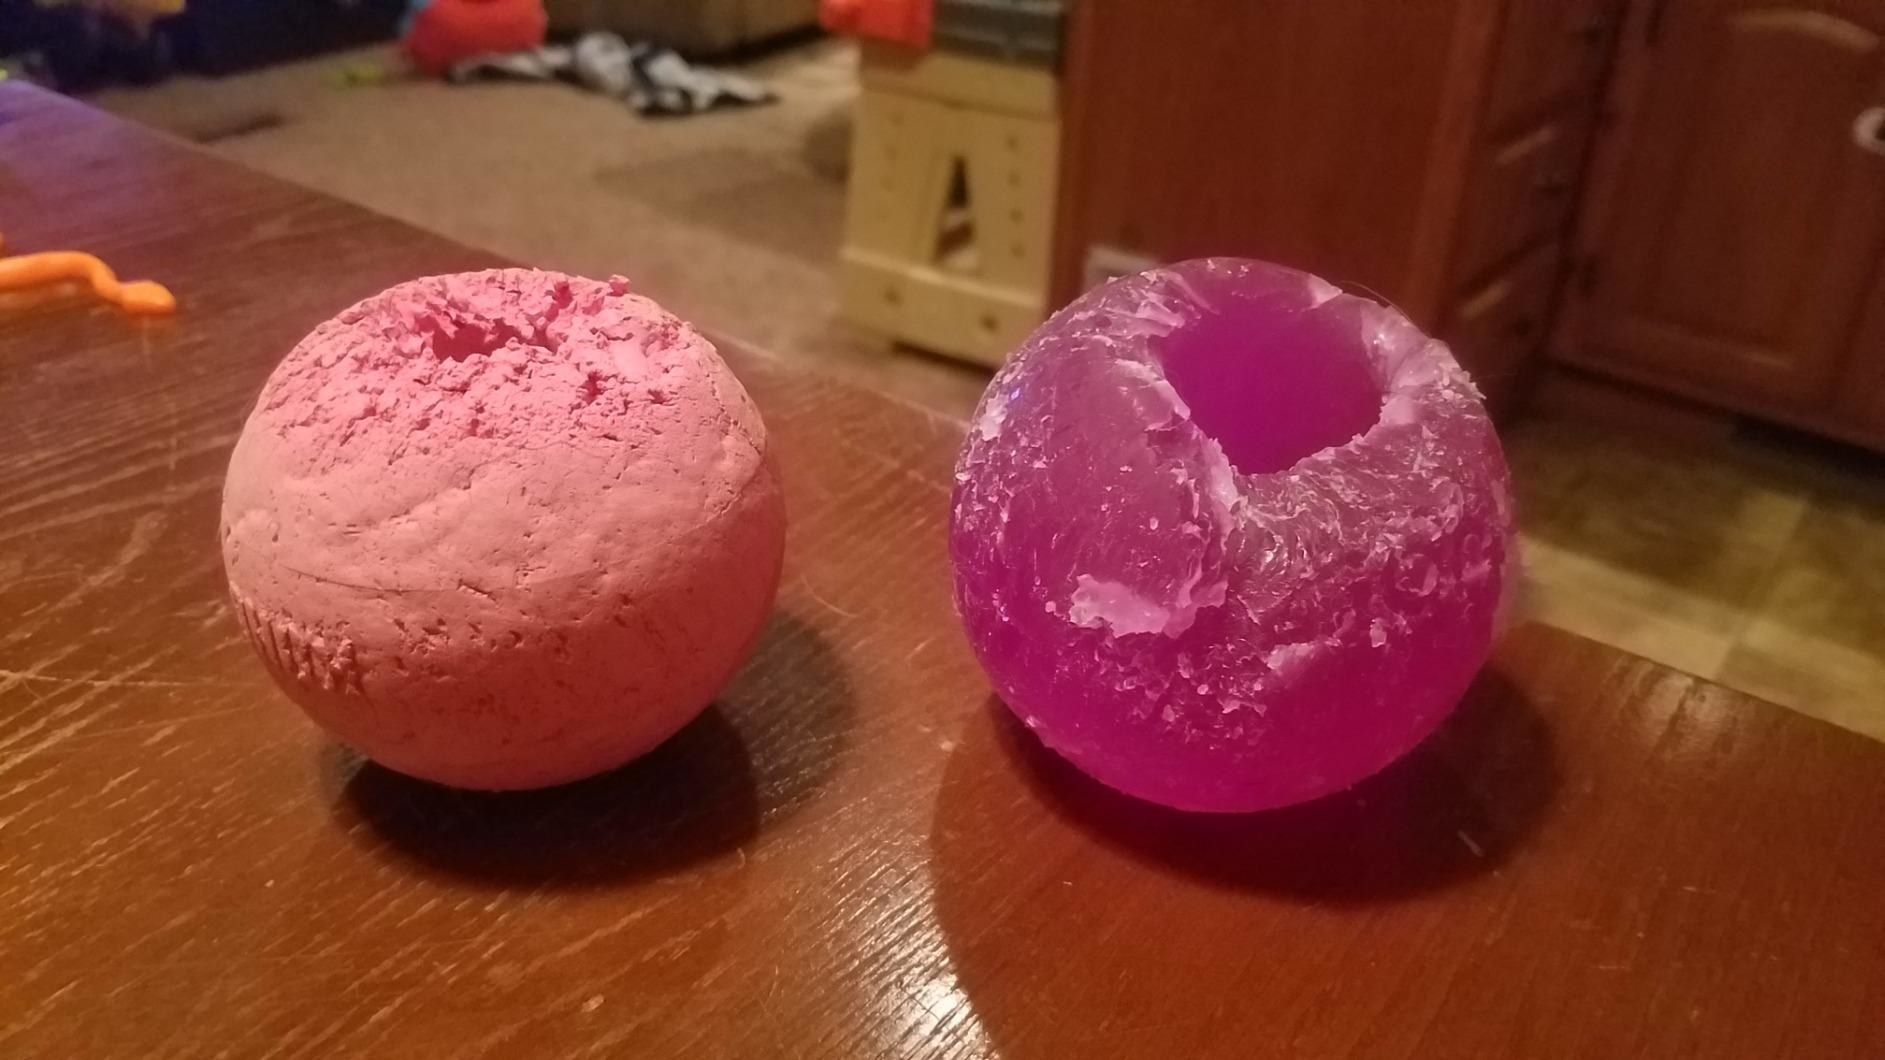 Review photo of before and after the Kong ball